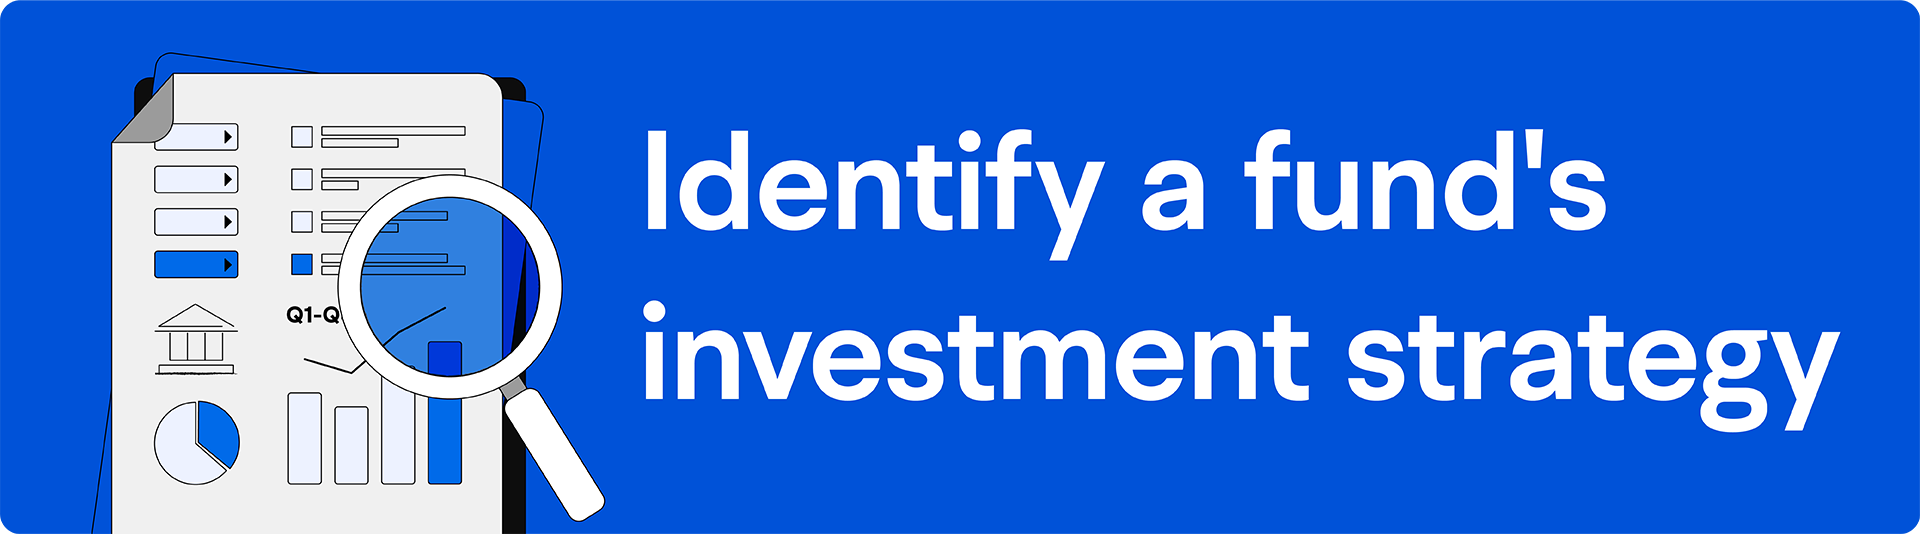 02 Identify a fund's investment strategy -1